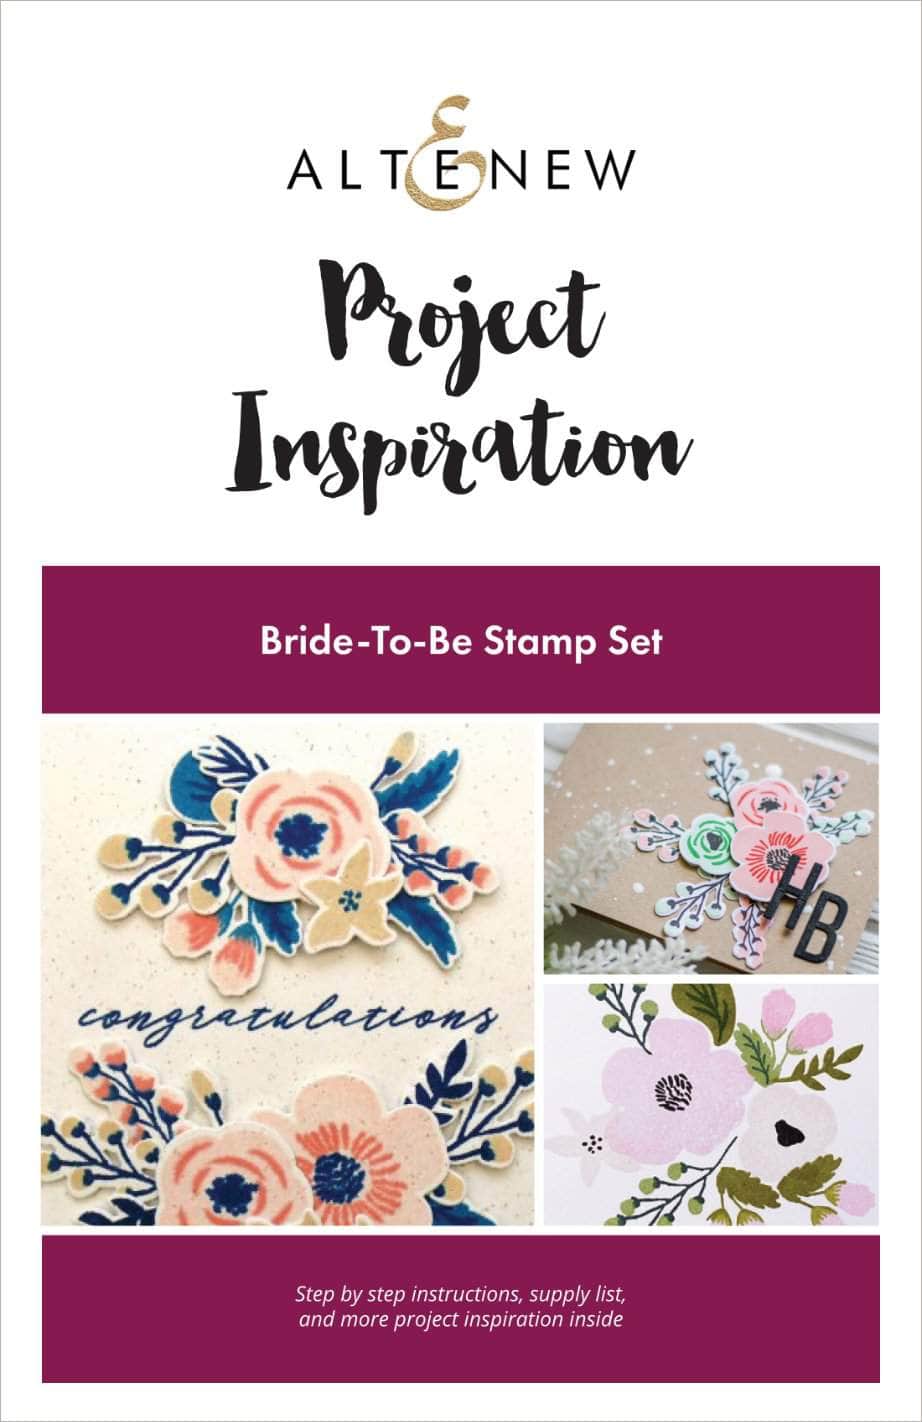 Printed Media Bride-To-Be Project Inspiration Guide